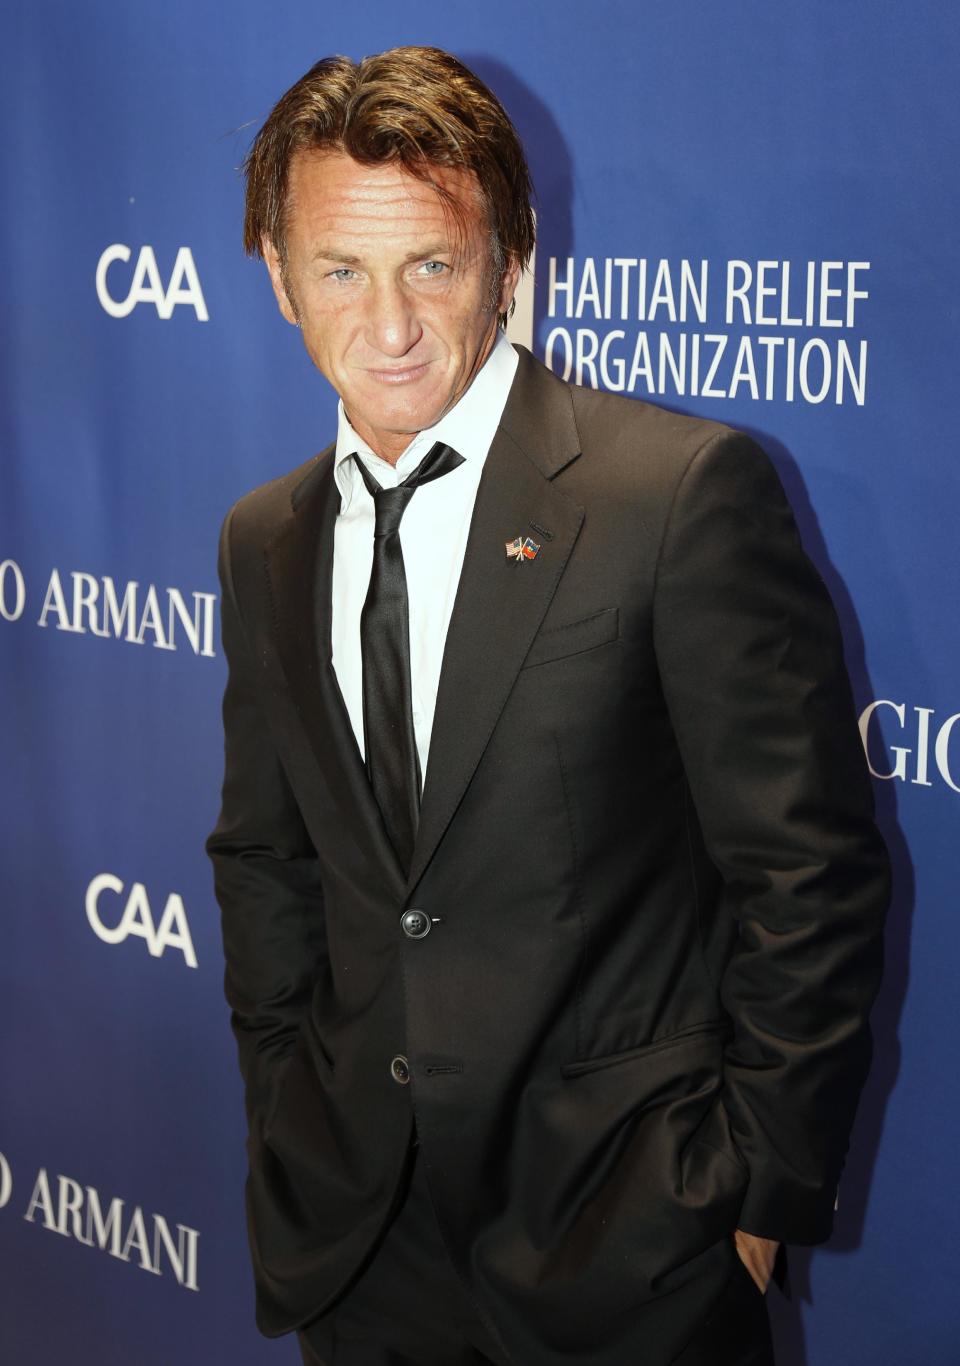 Sean Penn arrives at the 3rd Annual Sean Penn & Friends HELP HAITI HOME Gala on Saturday, Jan. 11, 2014 at the Montage Hotel in Beverly Hills, Calif. (Photo by Colin Young-Wolff /Invision/AP)